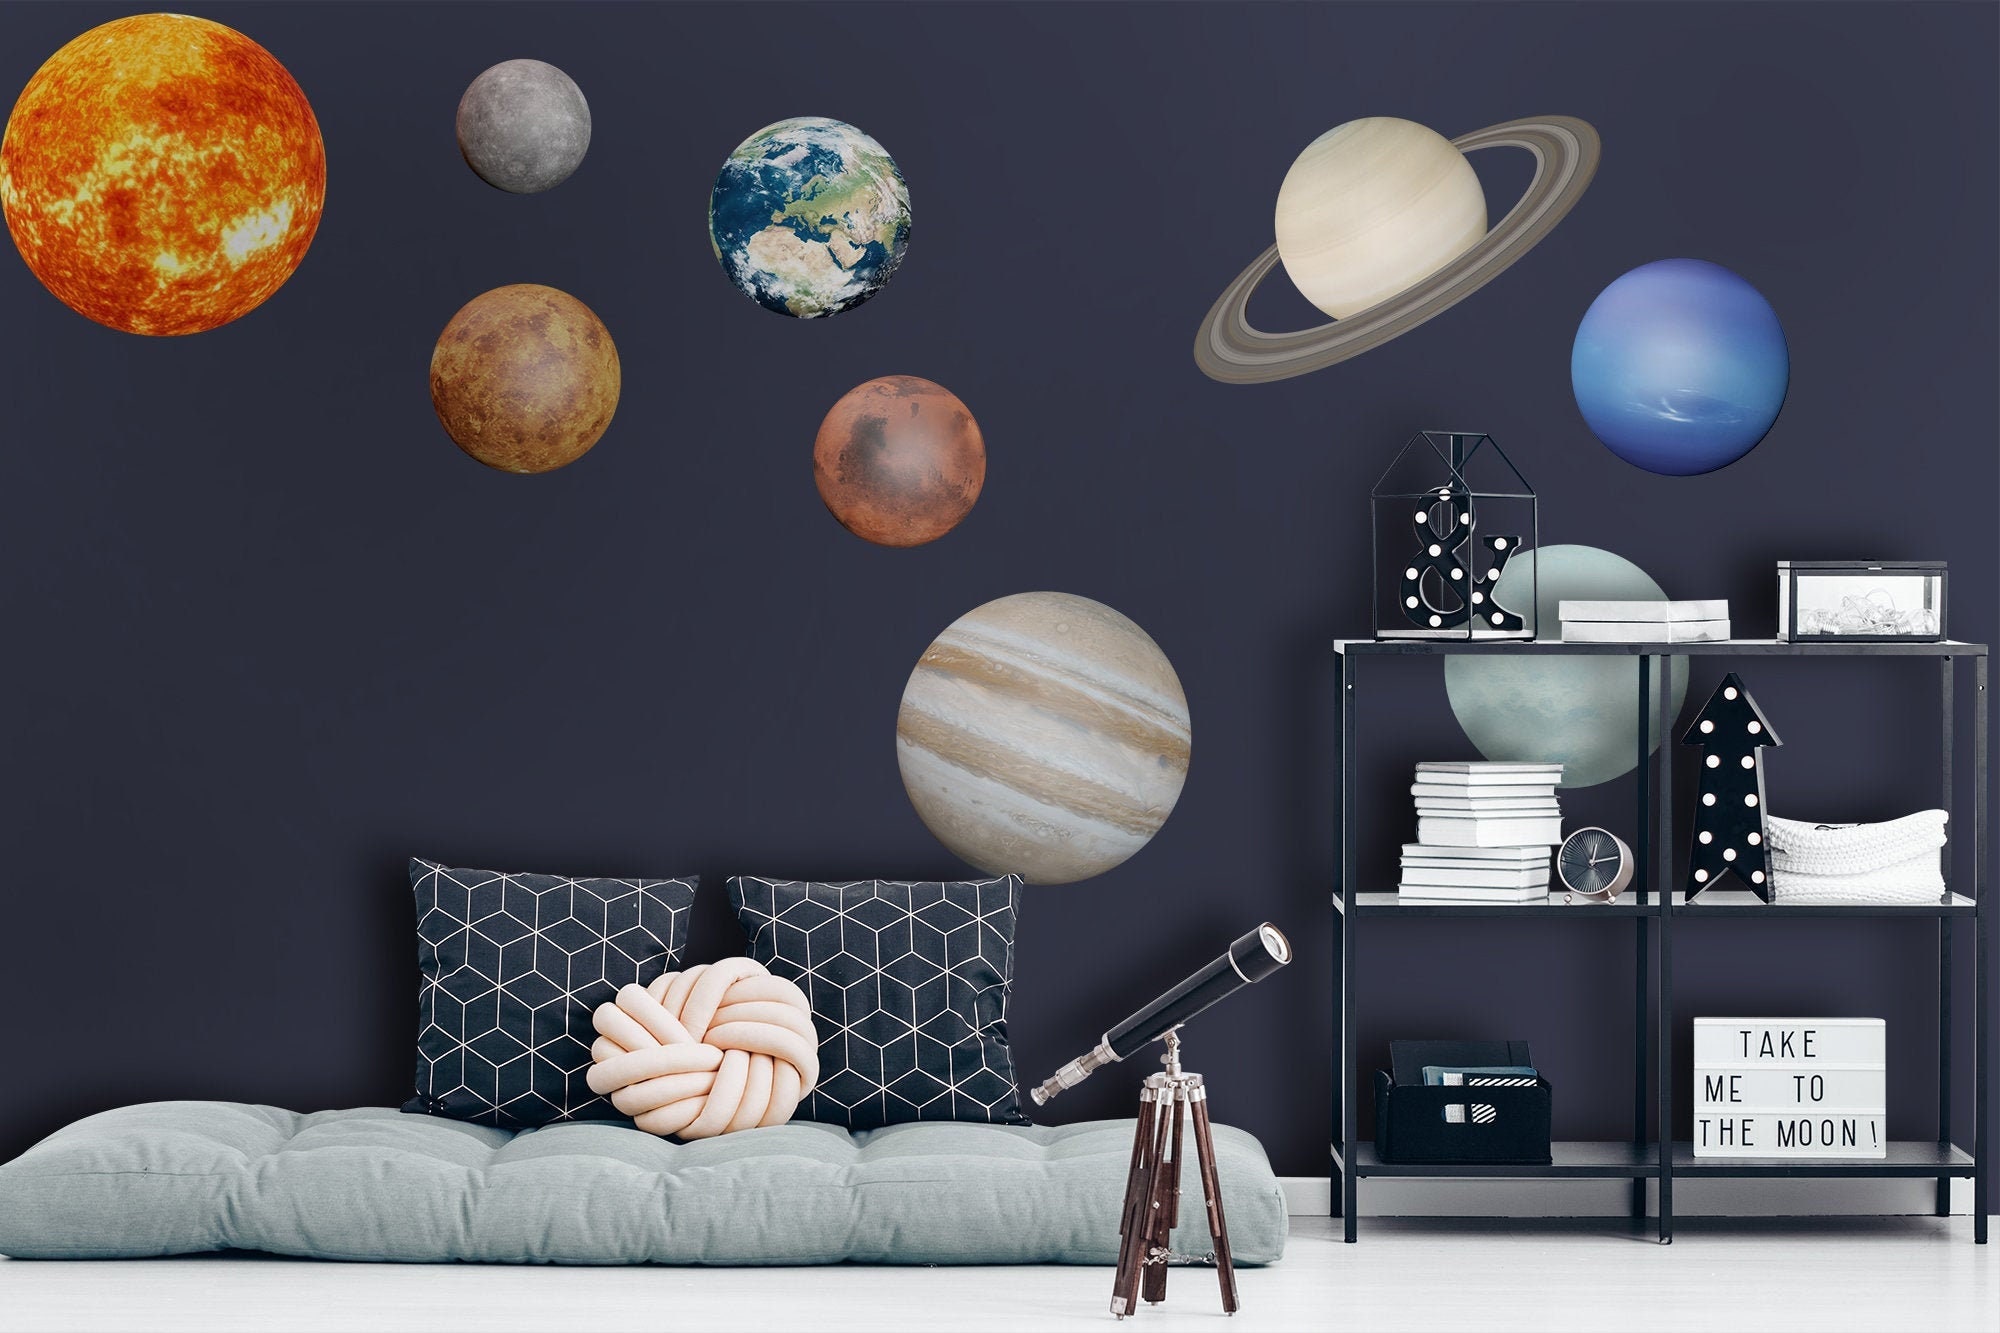 Peel and Stick Removable Space Capsule Window Wall Stickers Wall Mural for Bedroom Living Room Kids Room 3D Planet Universe Galaxy Outer Space Wall Decal Spacecraft Astronaut Wall Stickers 